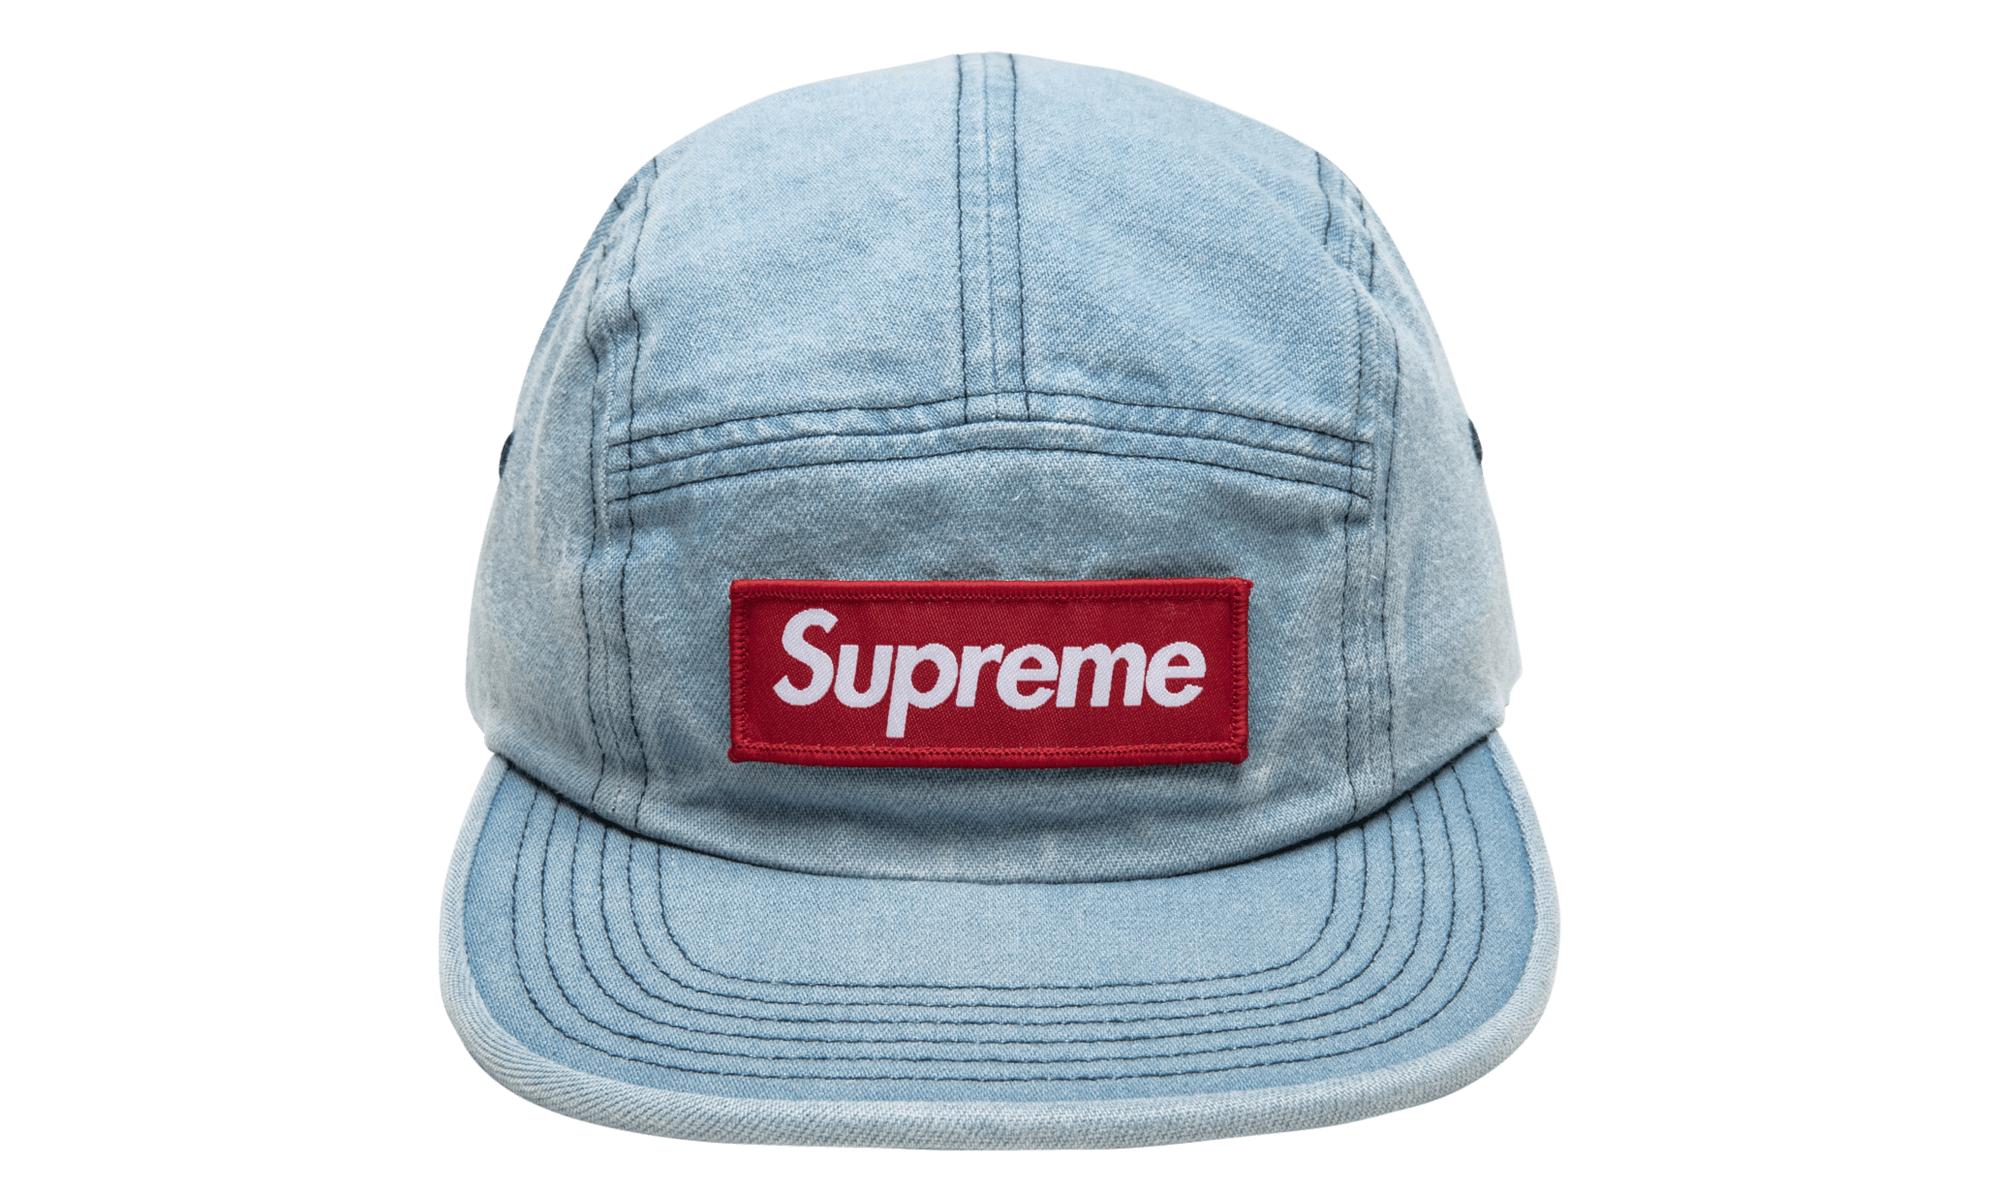 Supreme Washed Chino Twill Camp Cap in Blue for Men - Lyst